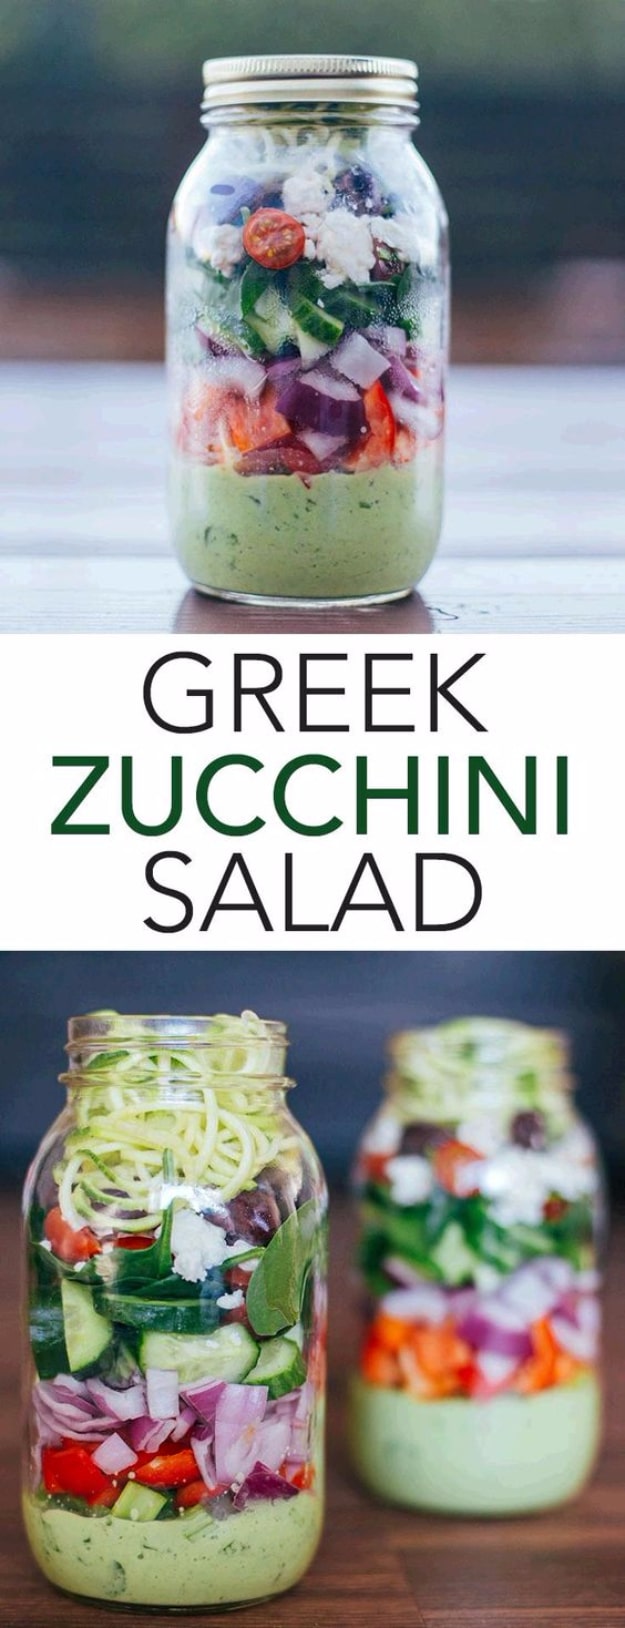 Best Recipes in A Jar - Greek Zucchini Salad In A Mason Jar - DIY Mason Jar Gifts, Cookie Recipes and Desserts, Canning Ideas, Overnight Oatmeal, How To Make Mason Jar Salad, Healthy Recipes and Printable Labels 